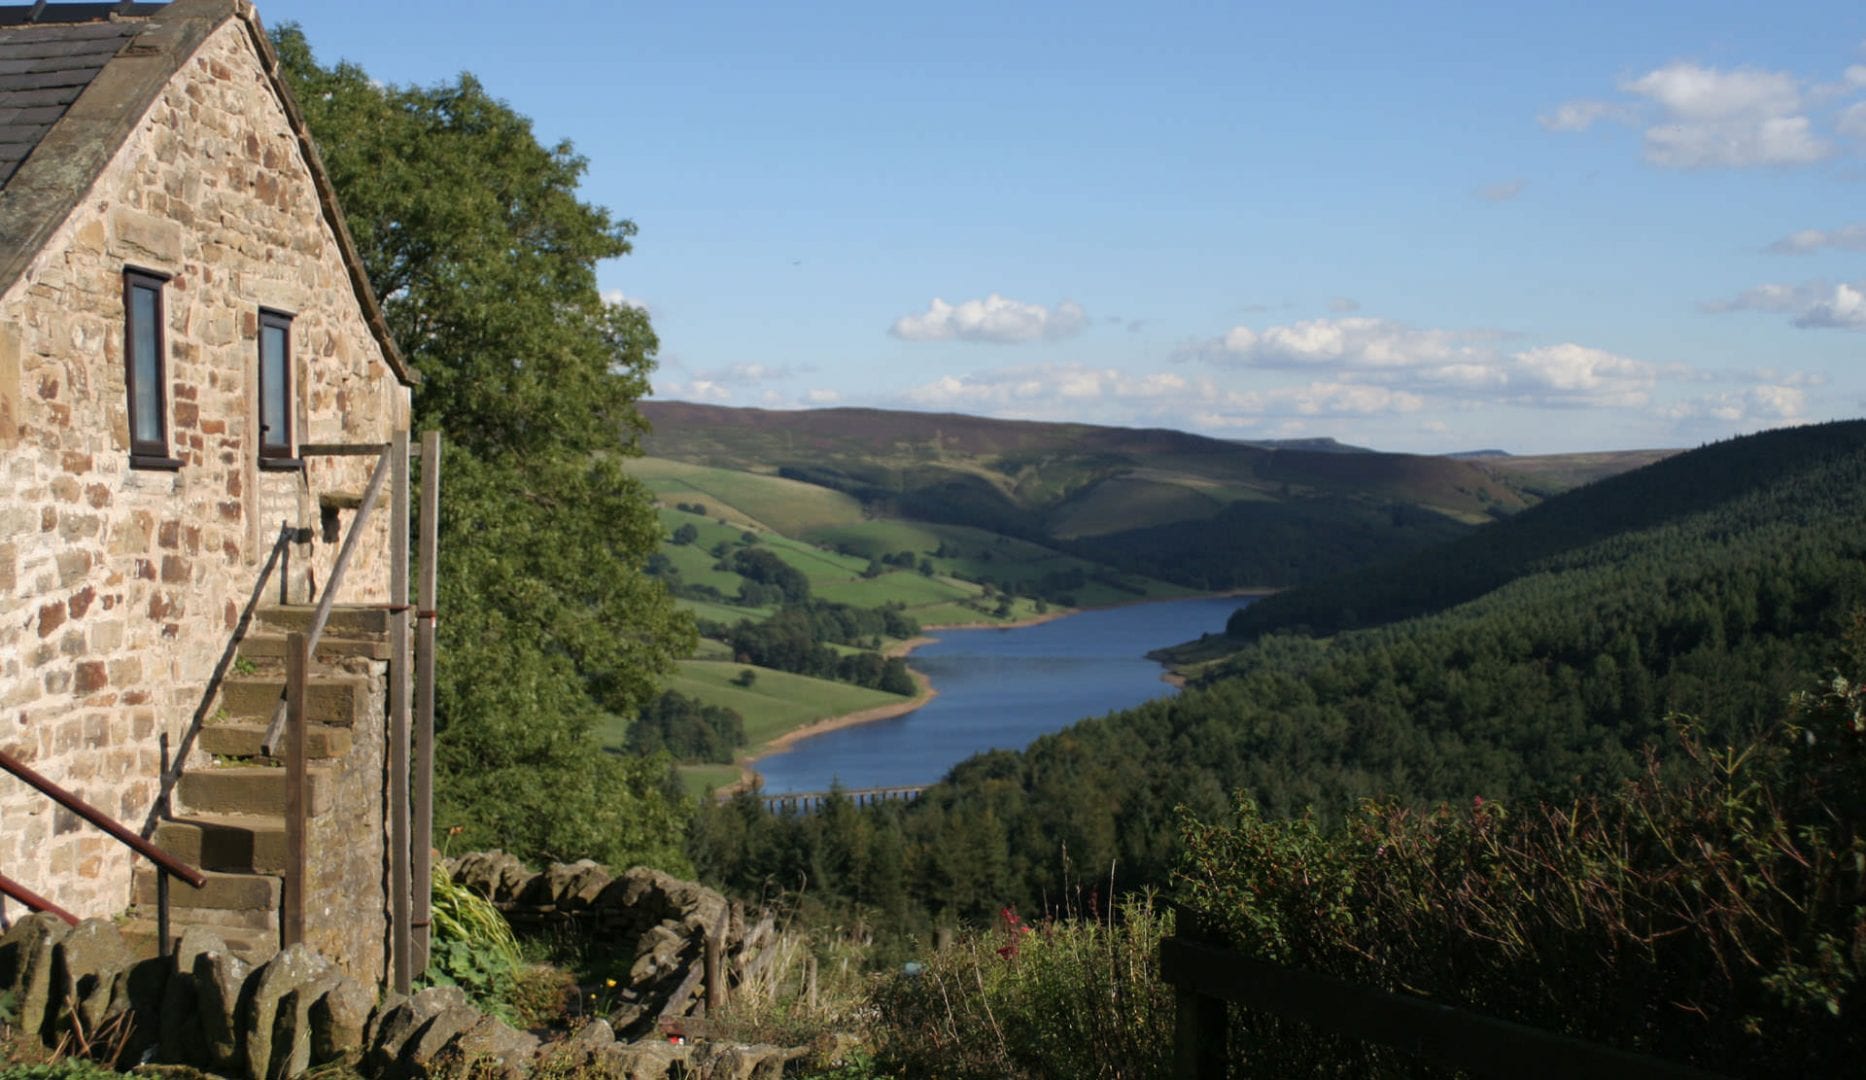 discounted group accommodation at Lockerbrook Outdoor Centre in the Peak District